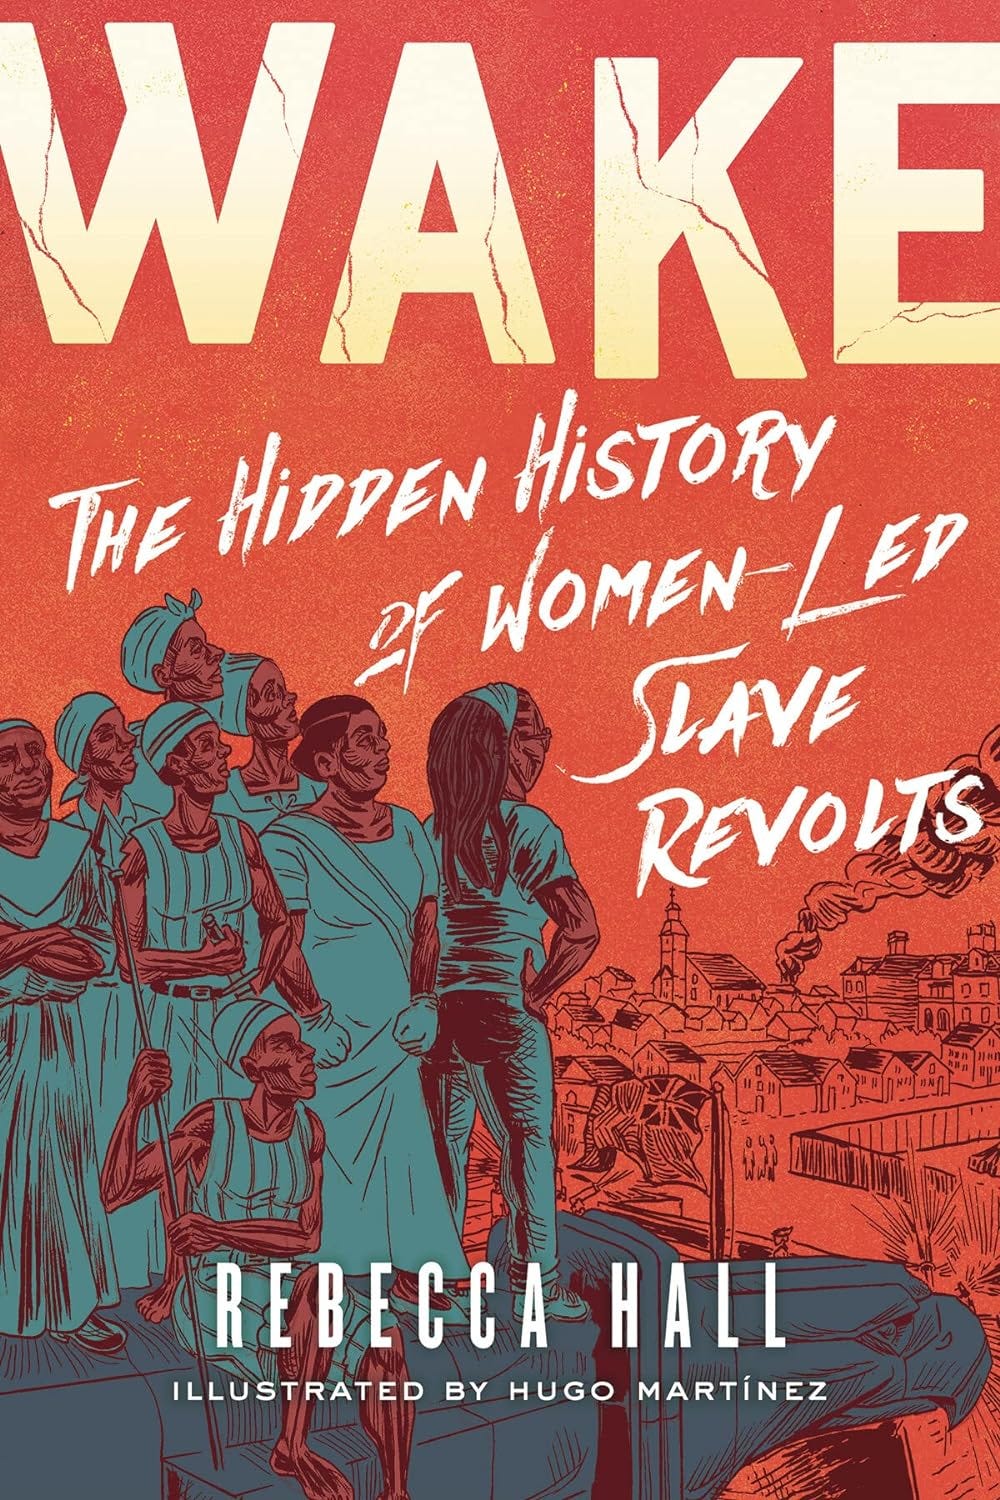 Book cover - Wake: The Hidden History of Women-Led Slave Revolts by Rebecca Hall